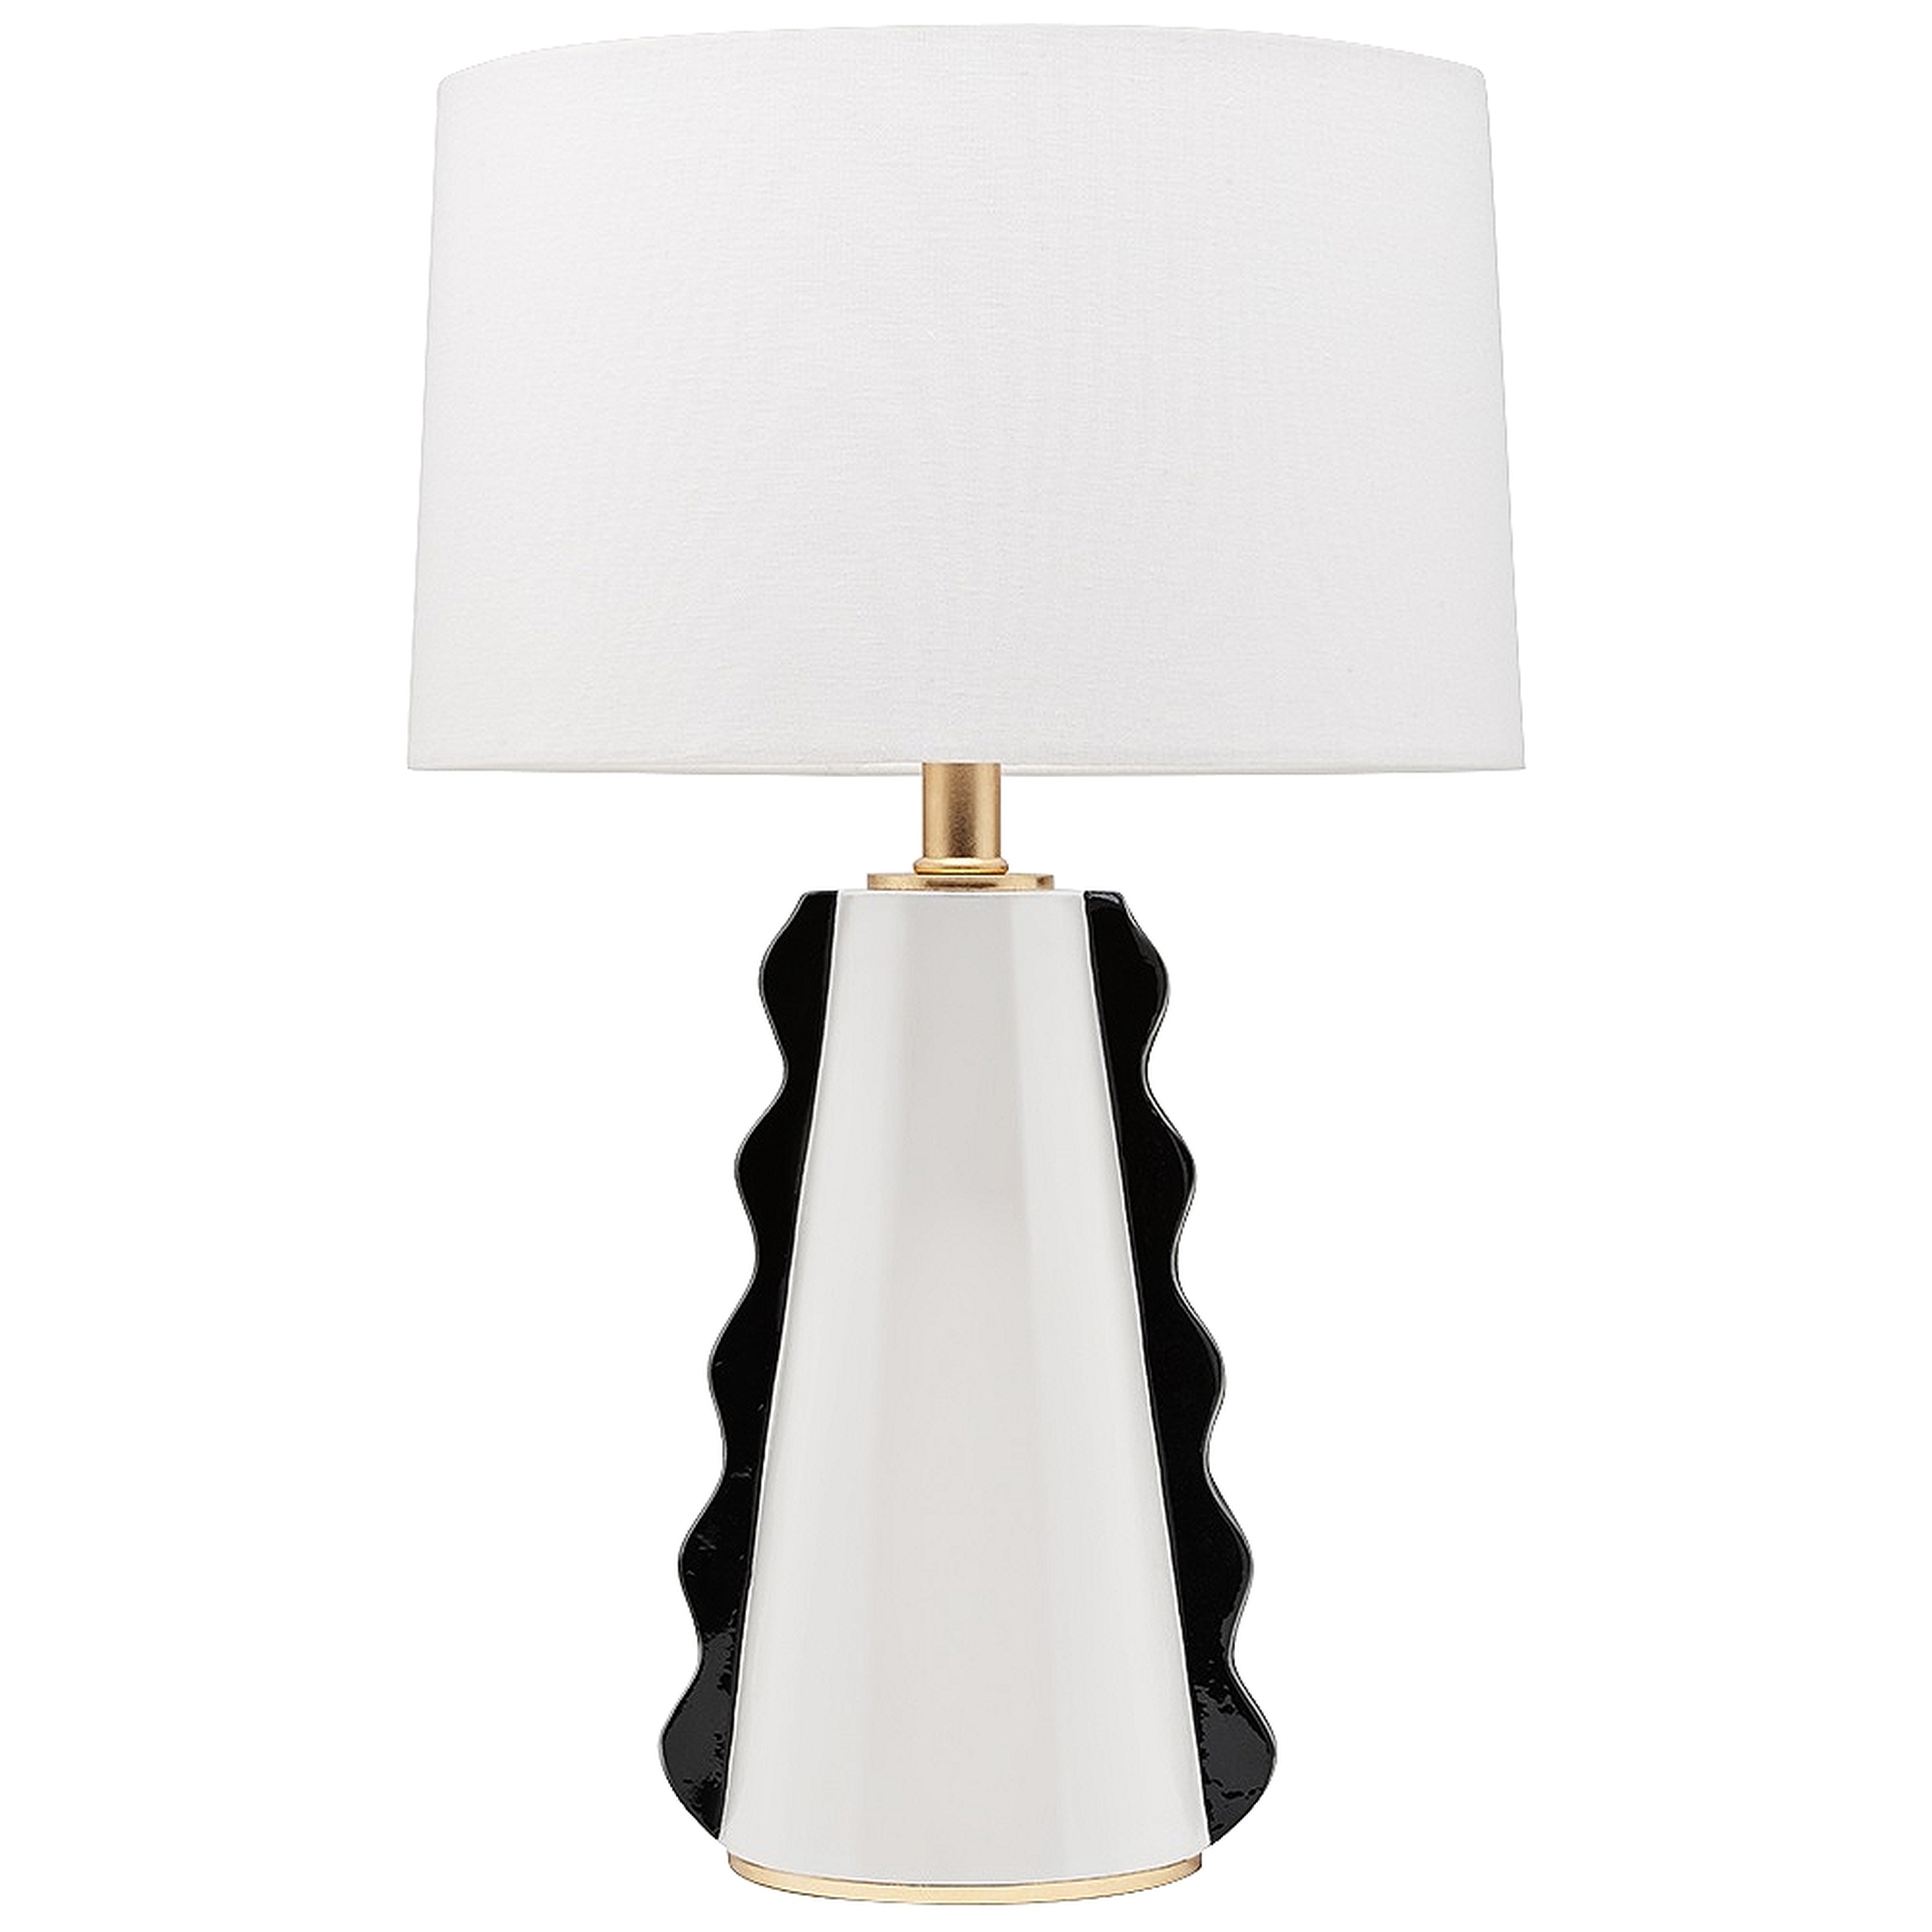 Mitzi Faith Black and White Ceramic Accent Table Lamp - Style # 77A18 - Lamps Plus